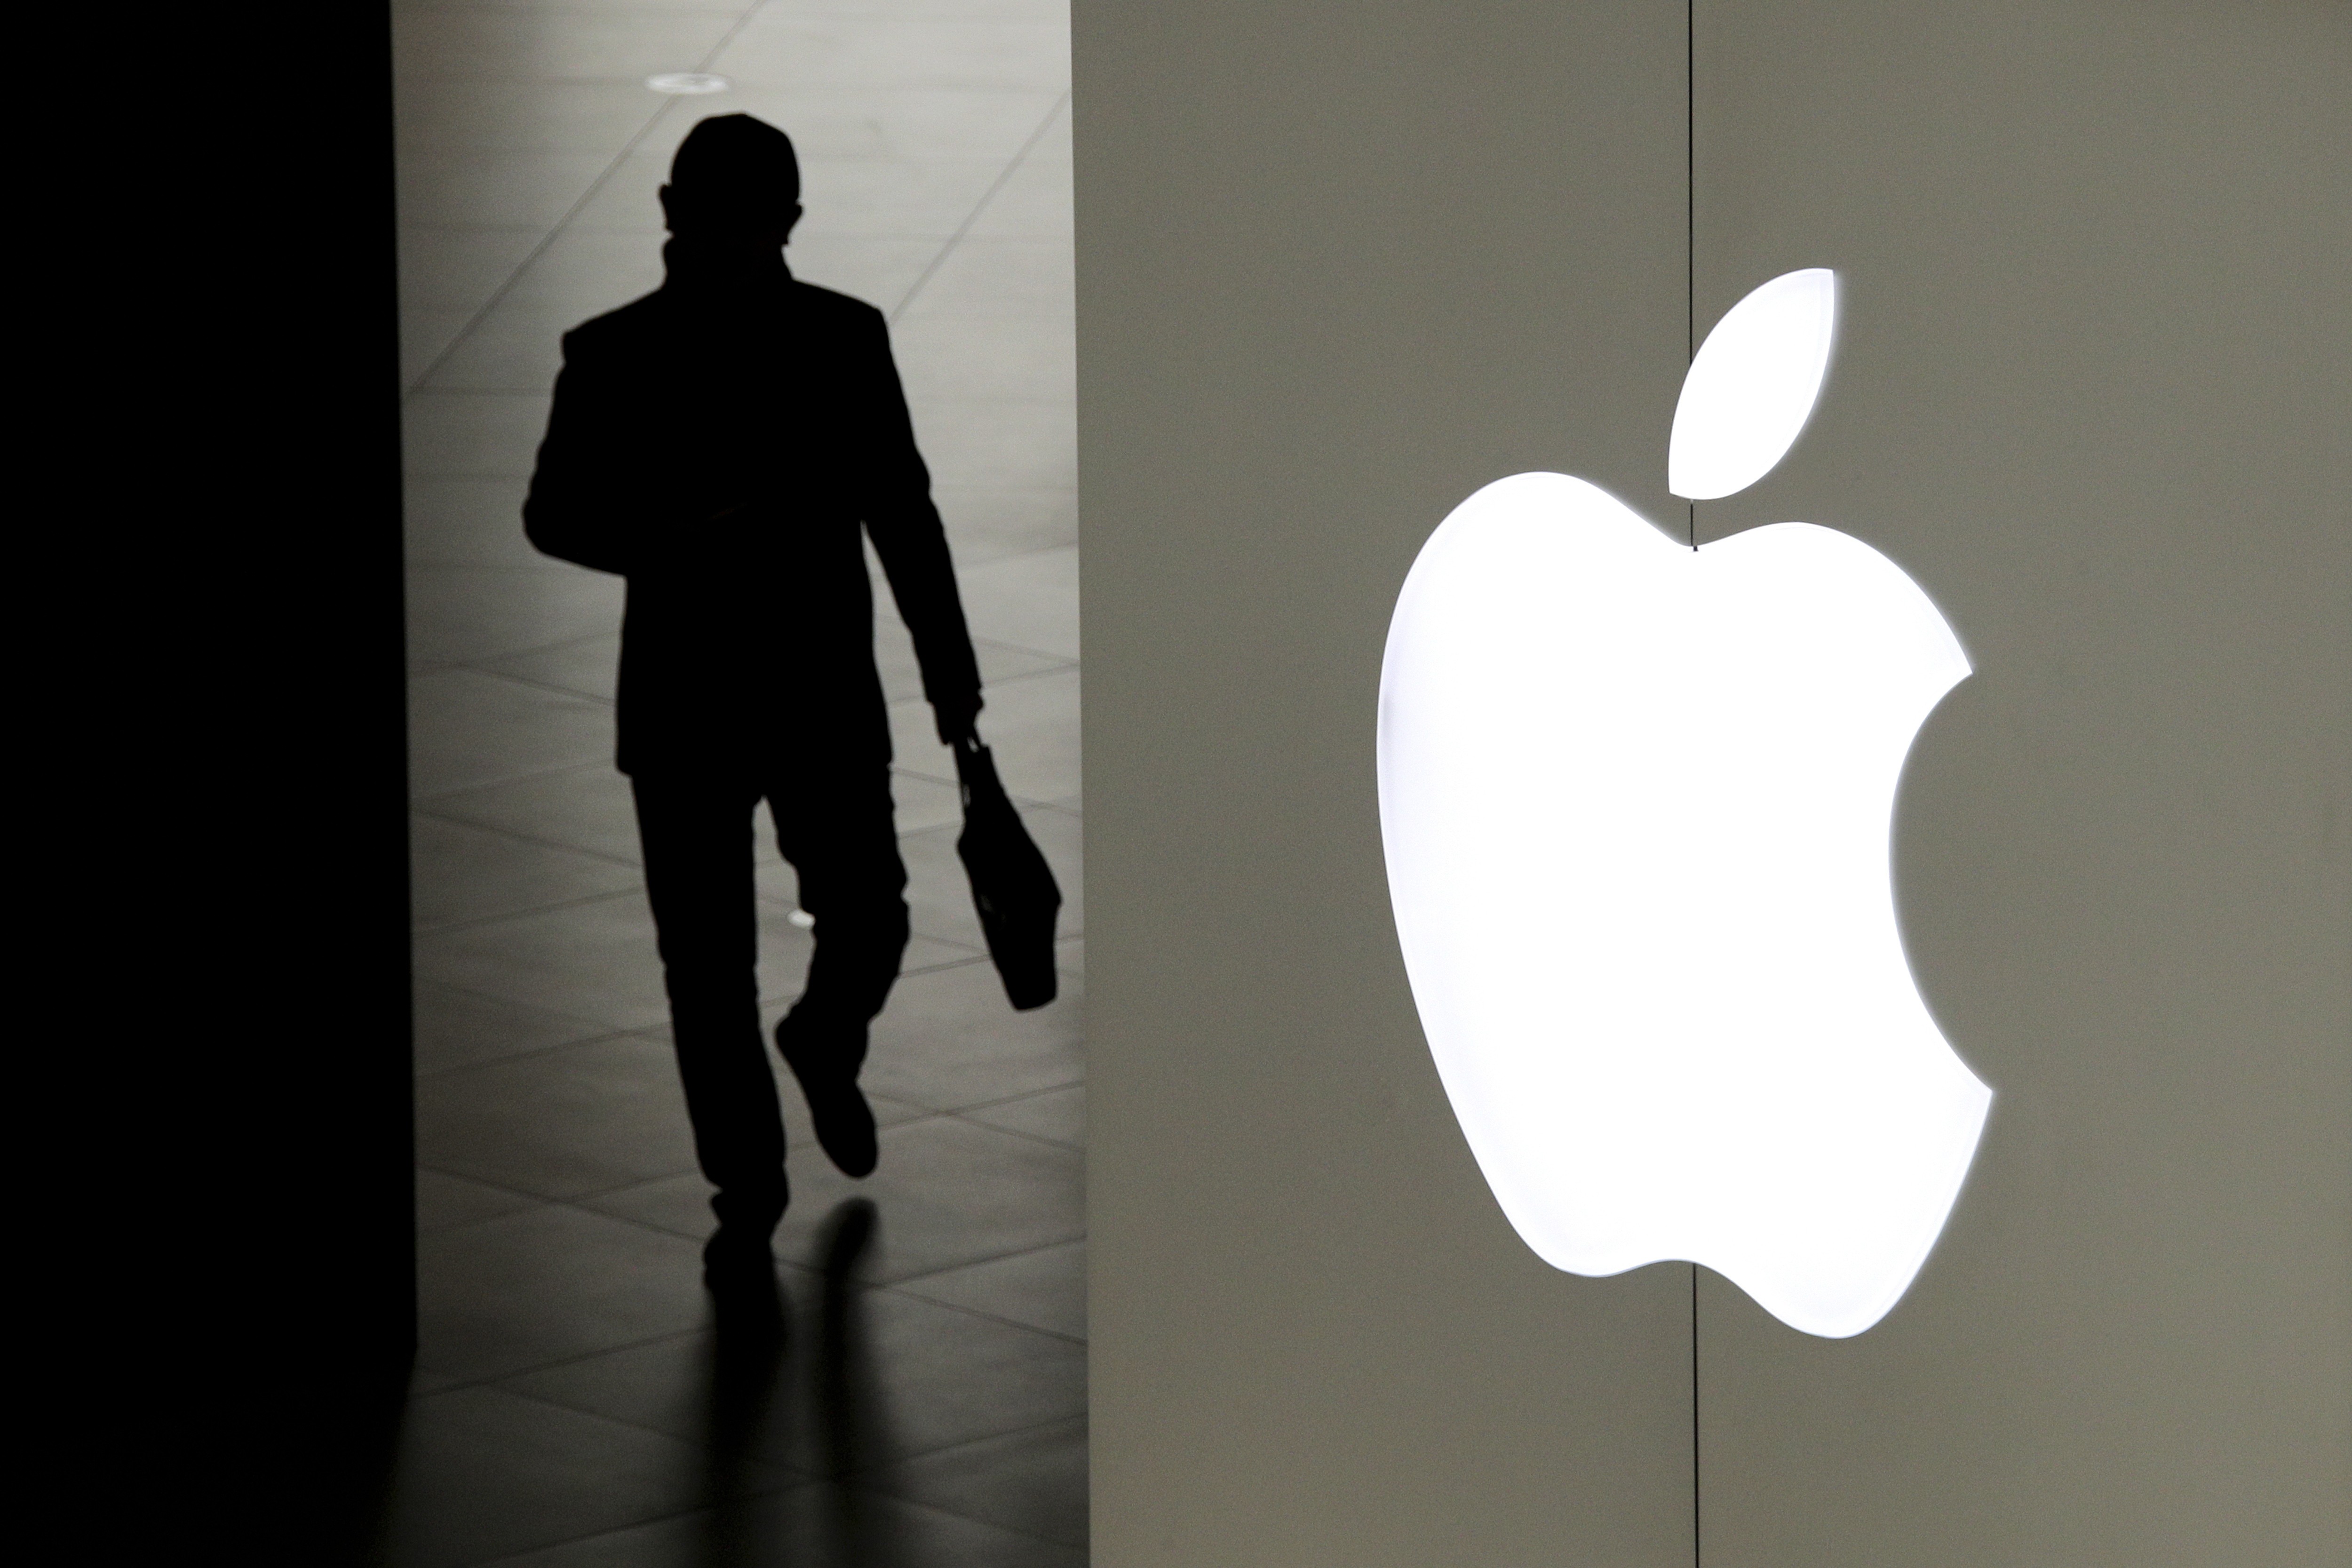 Tech giant Apple has found a tax haven in the island of Jersey, according to the Paradise Papers. Photo: AP